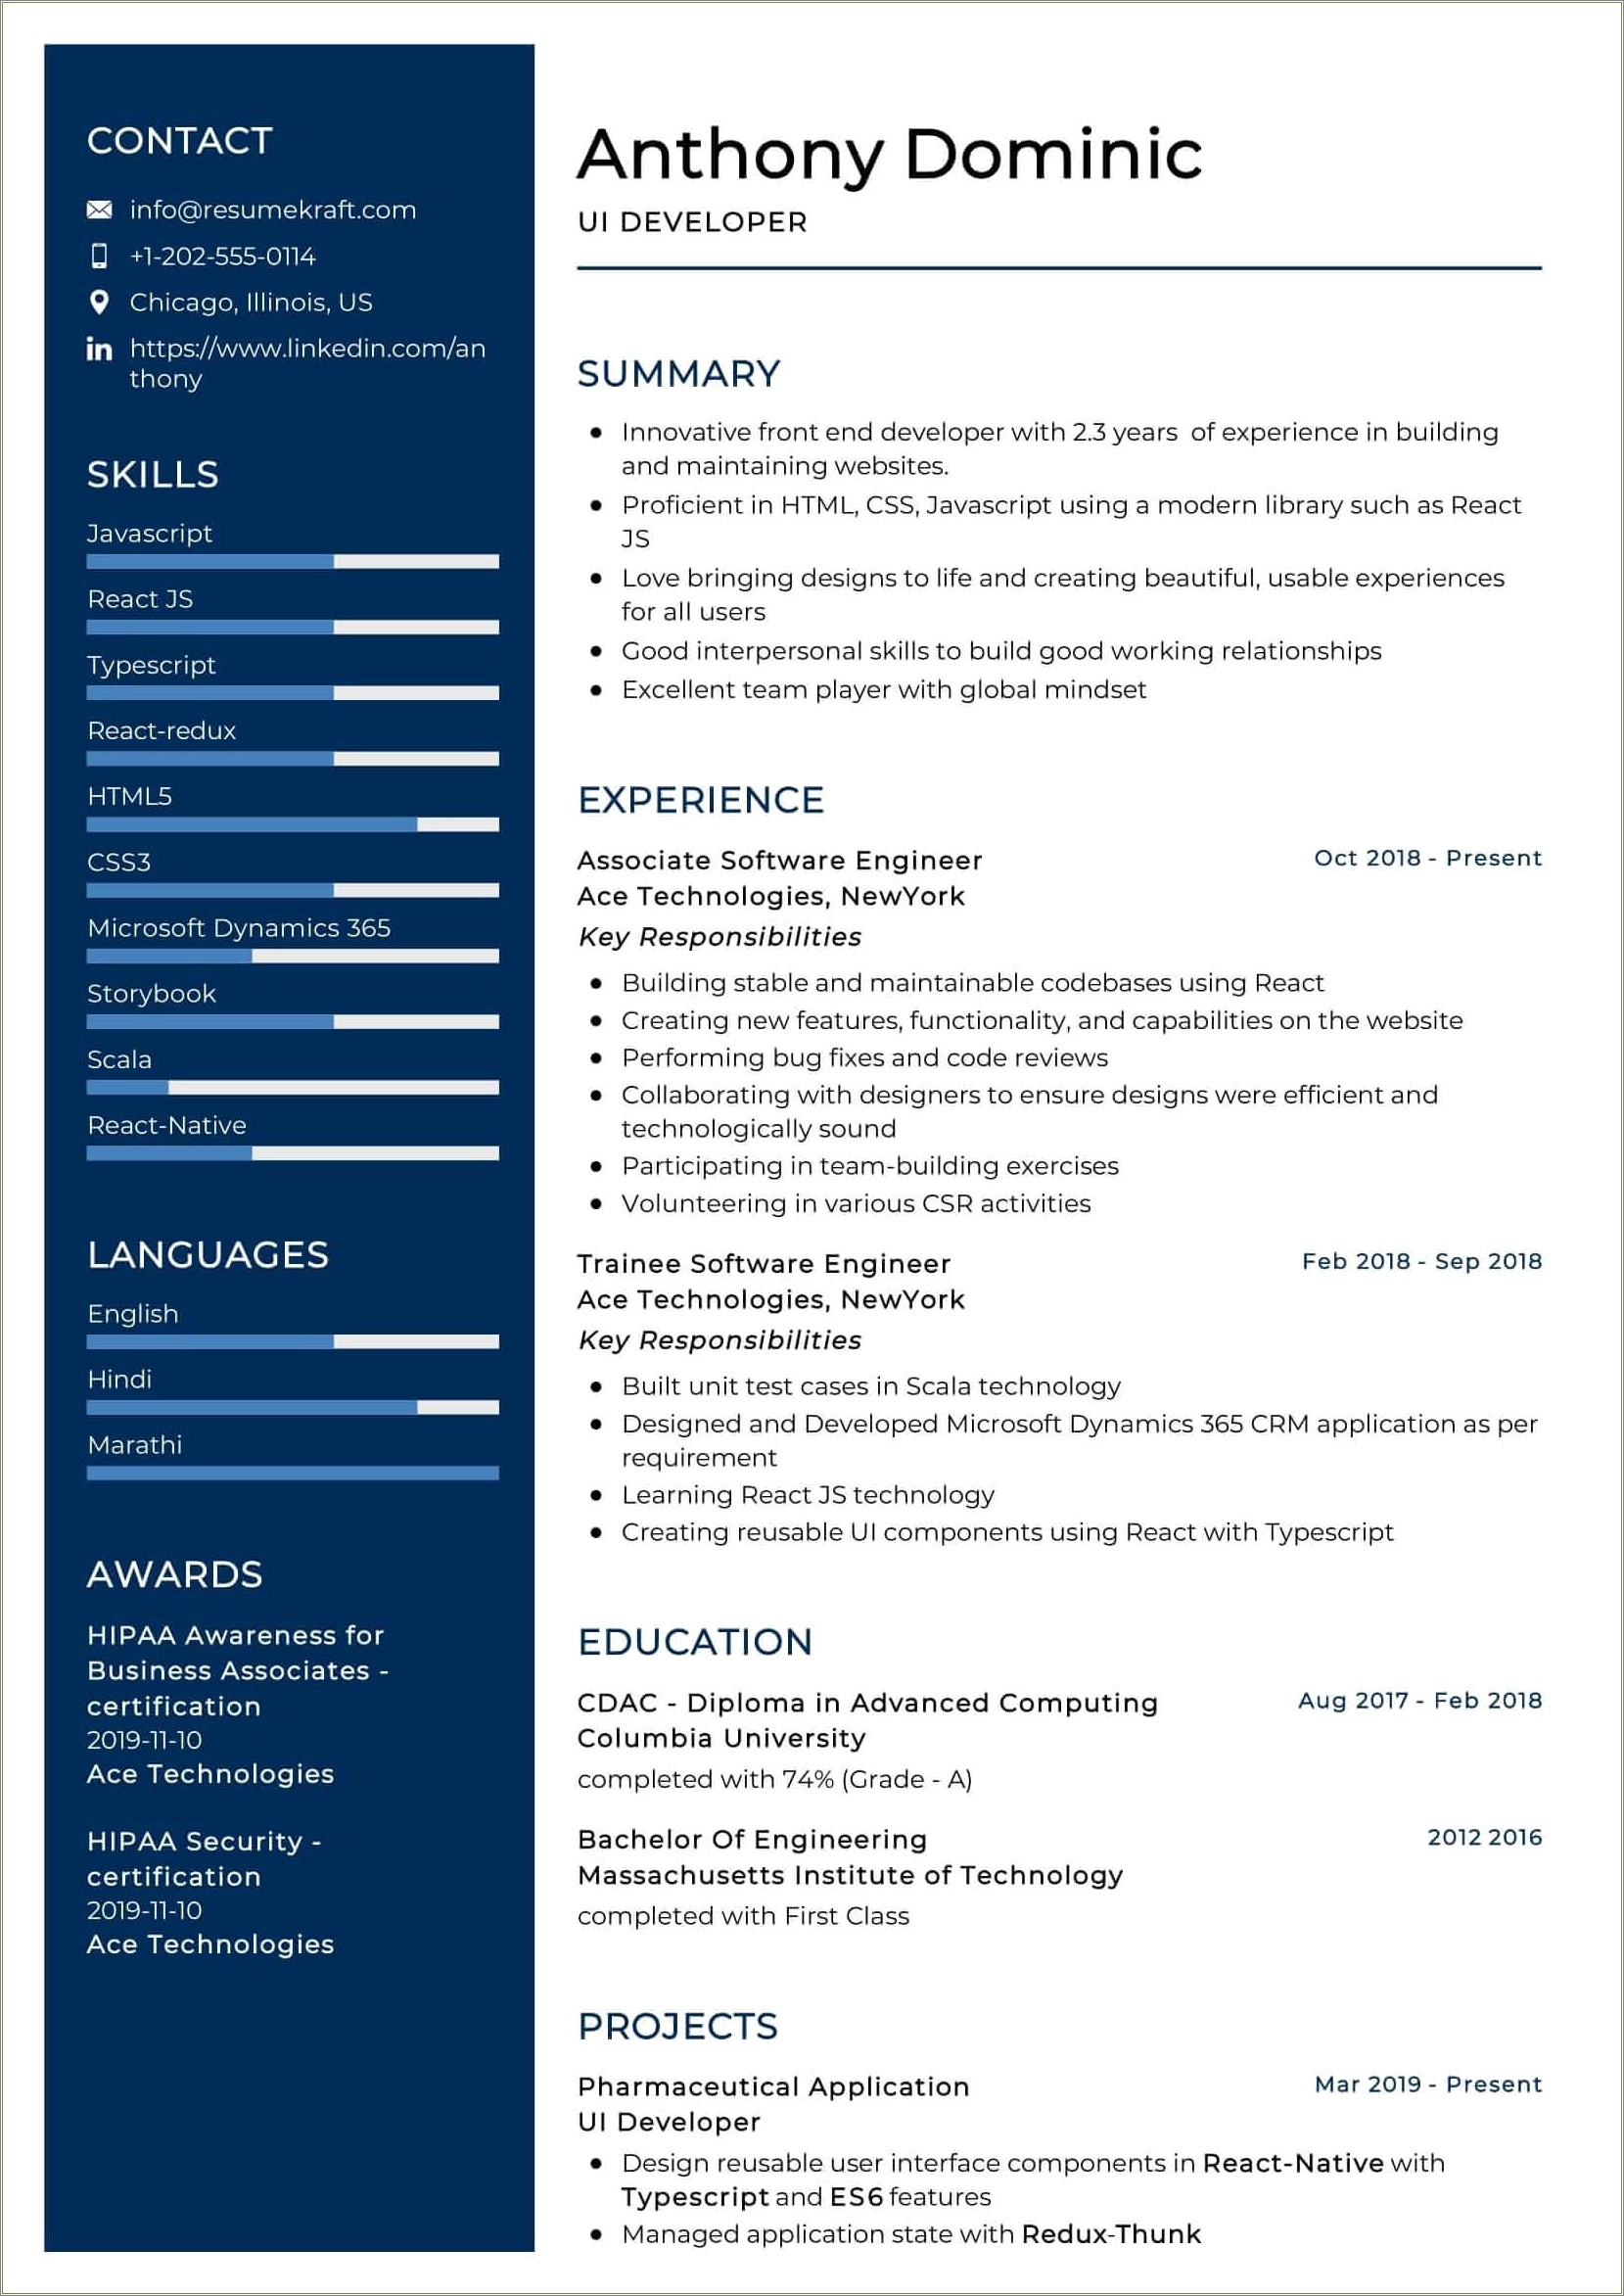 Sample Resume For Ui Developer With 5 Years